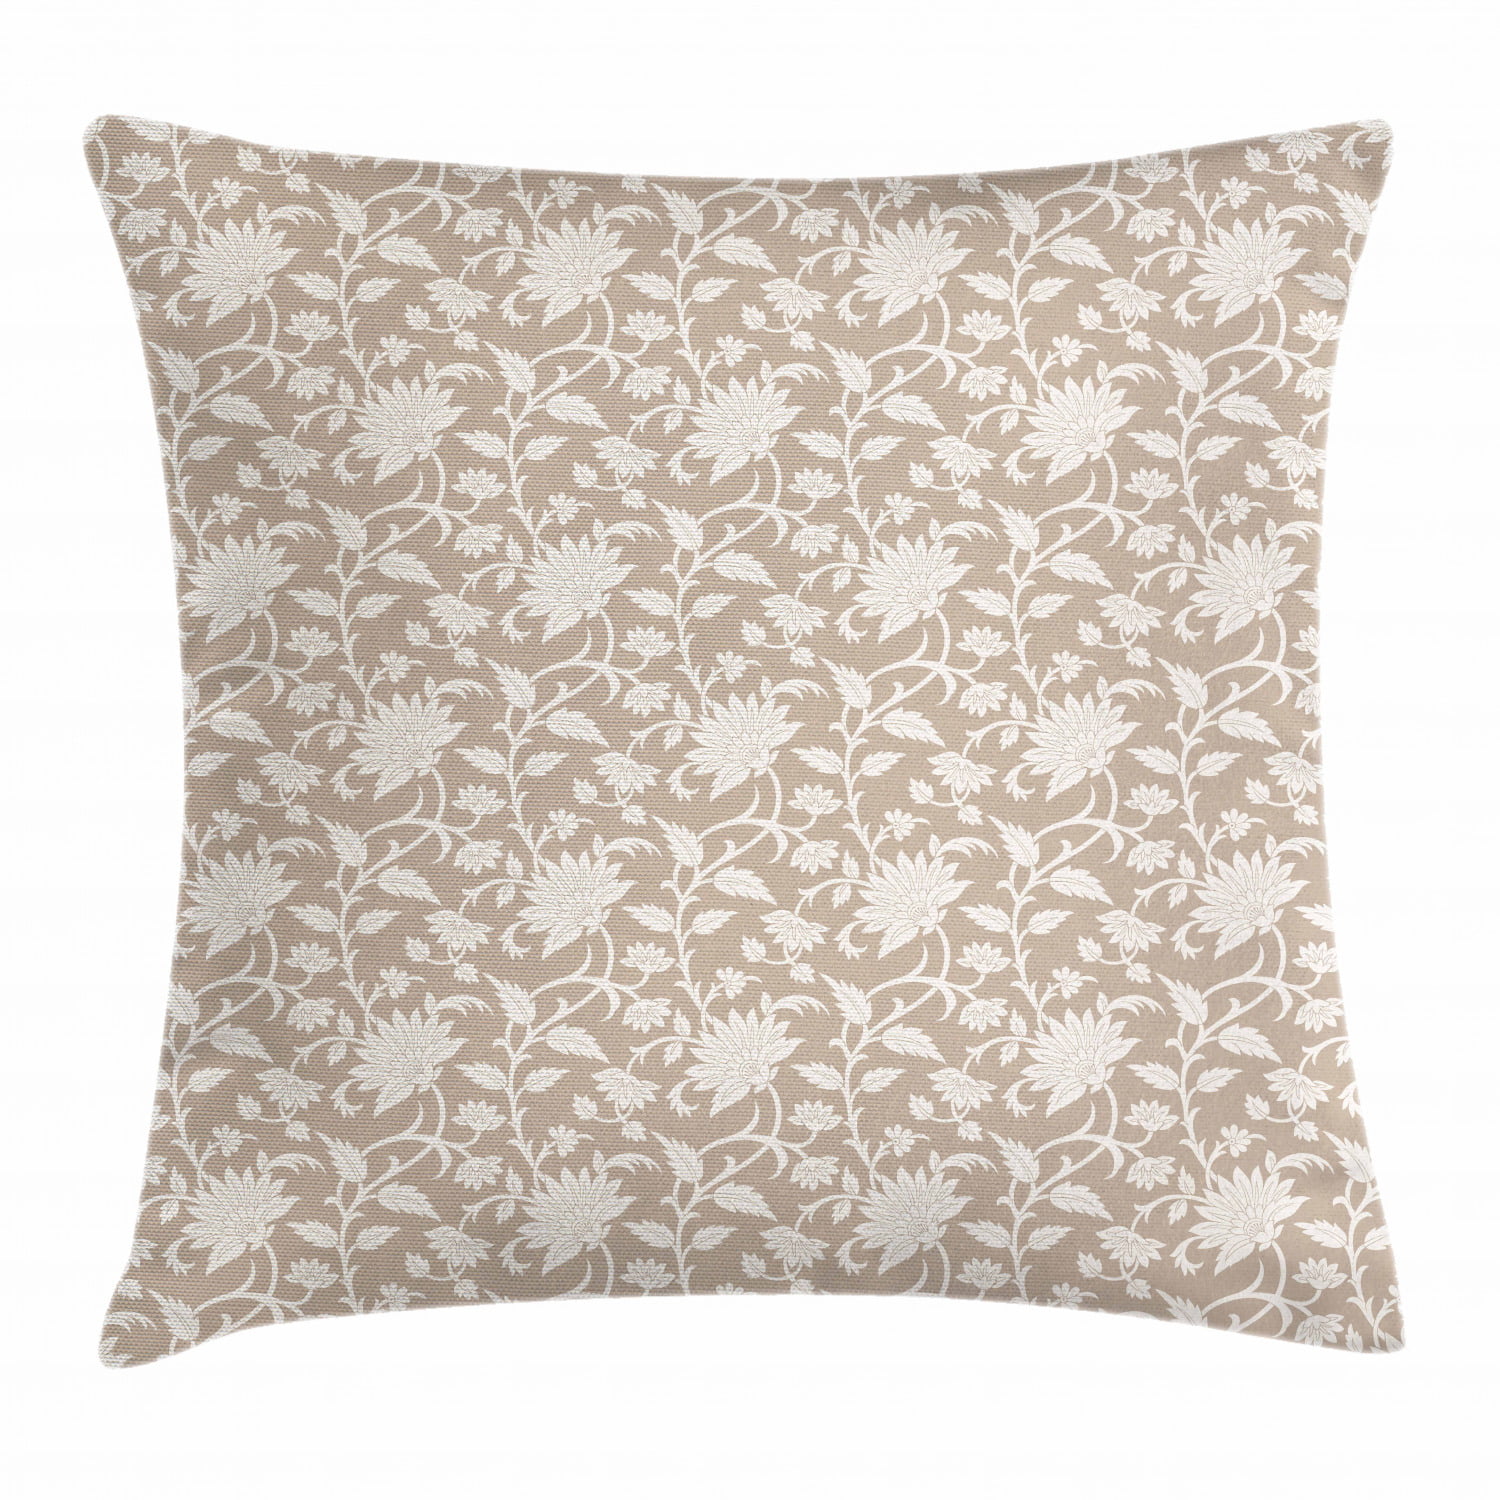 Floral Throw Pillow Cushion Cover, Floral Arrangement with Monochrome ...